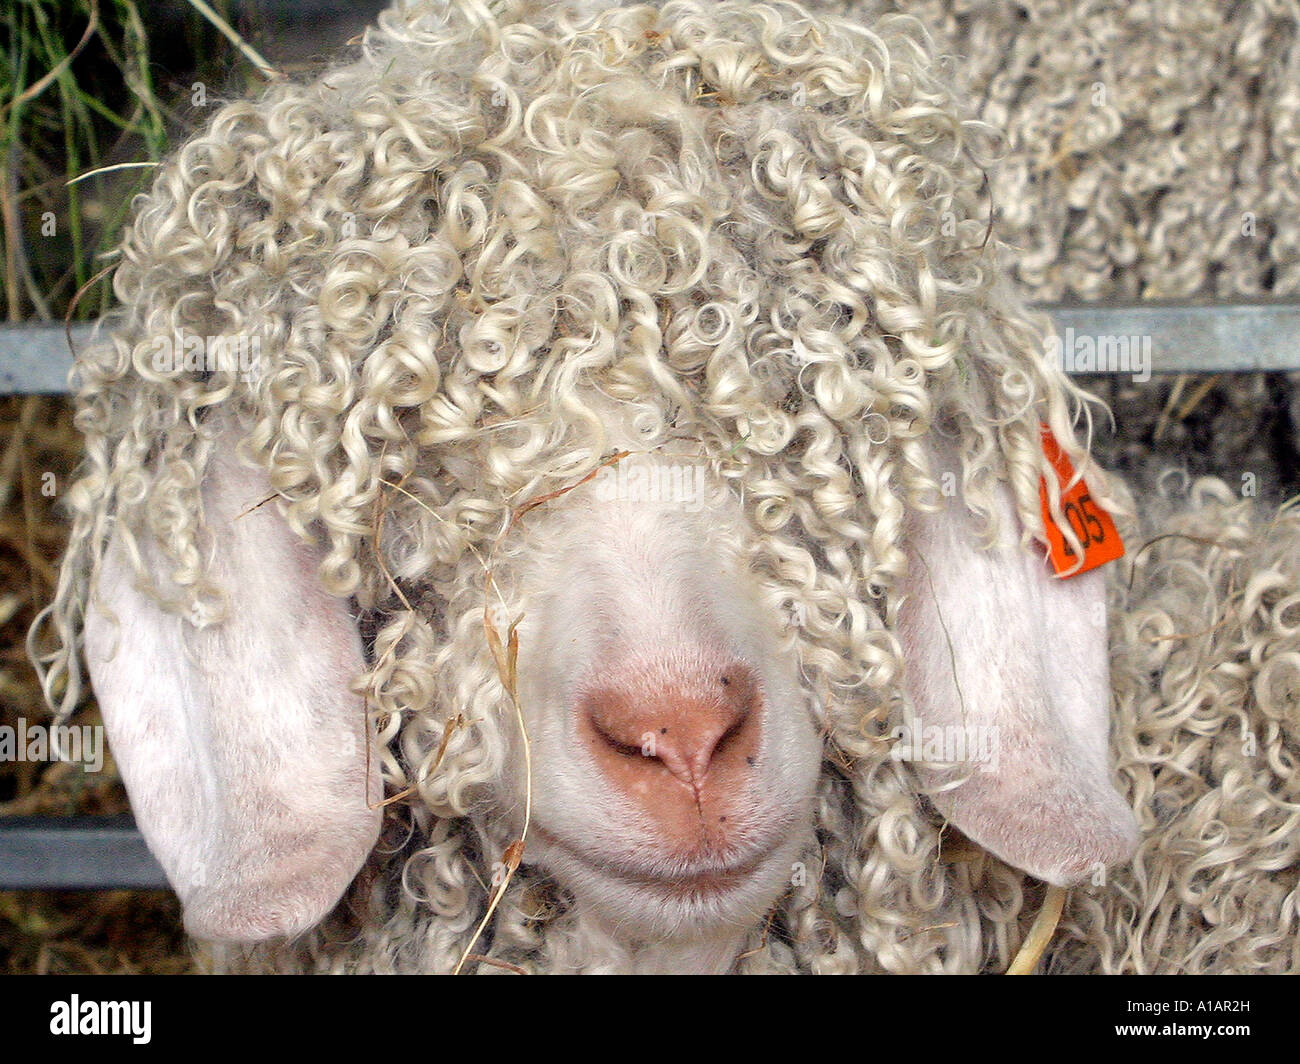 A sheep with permed hair. Stock Photo